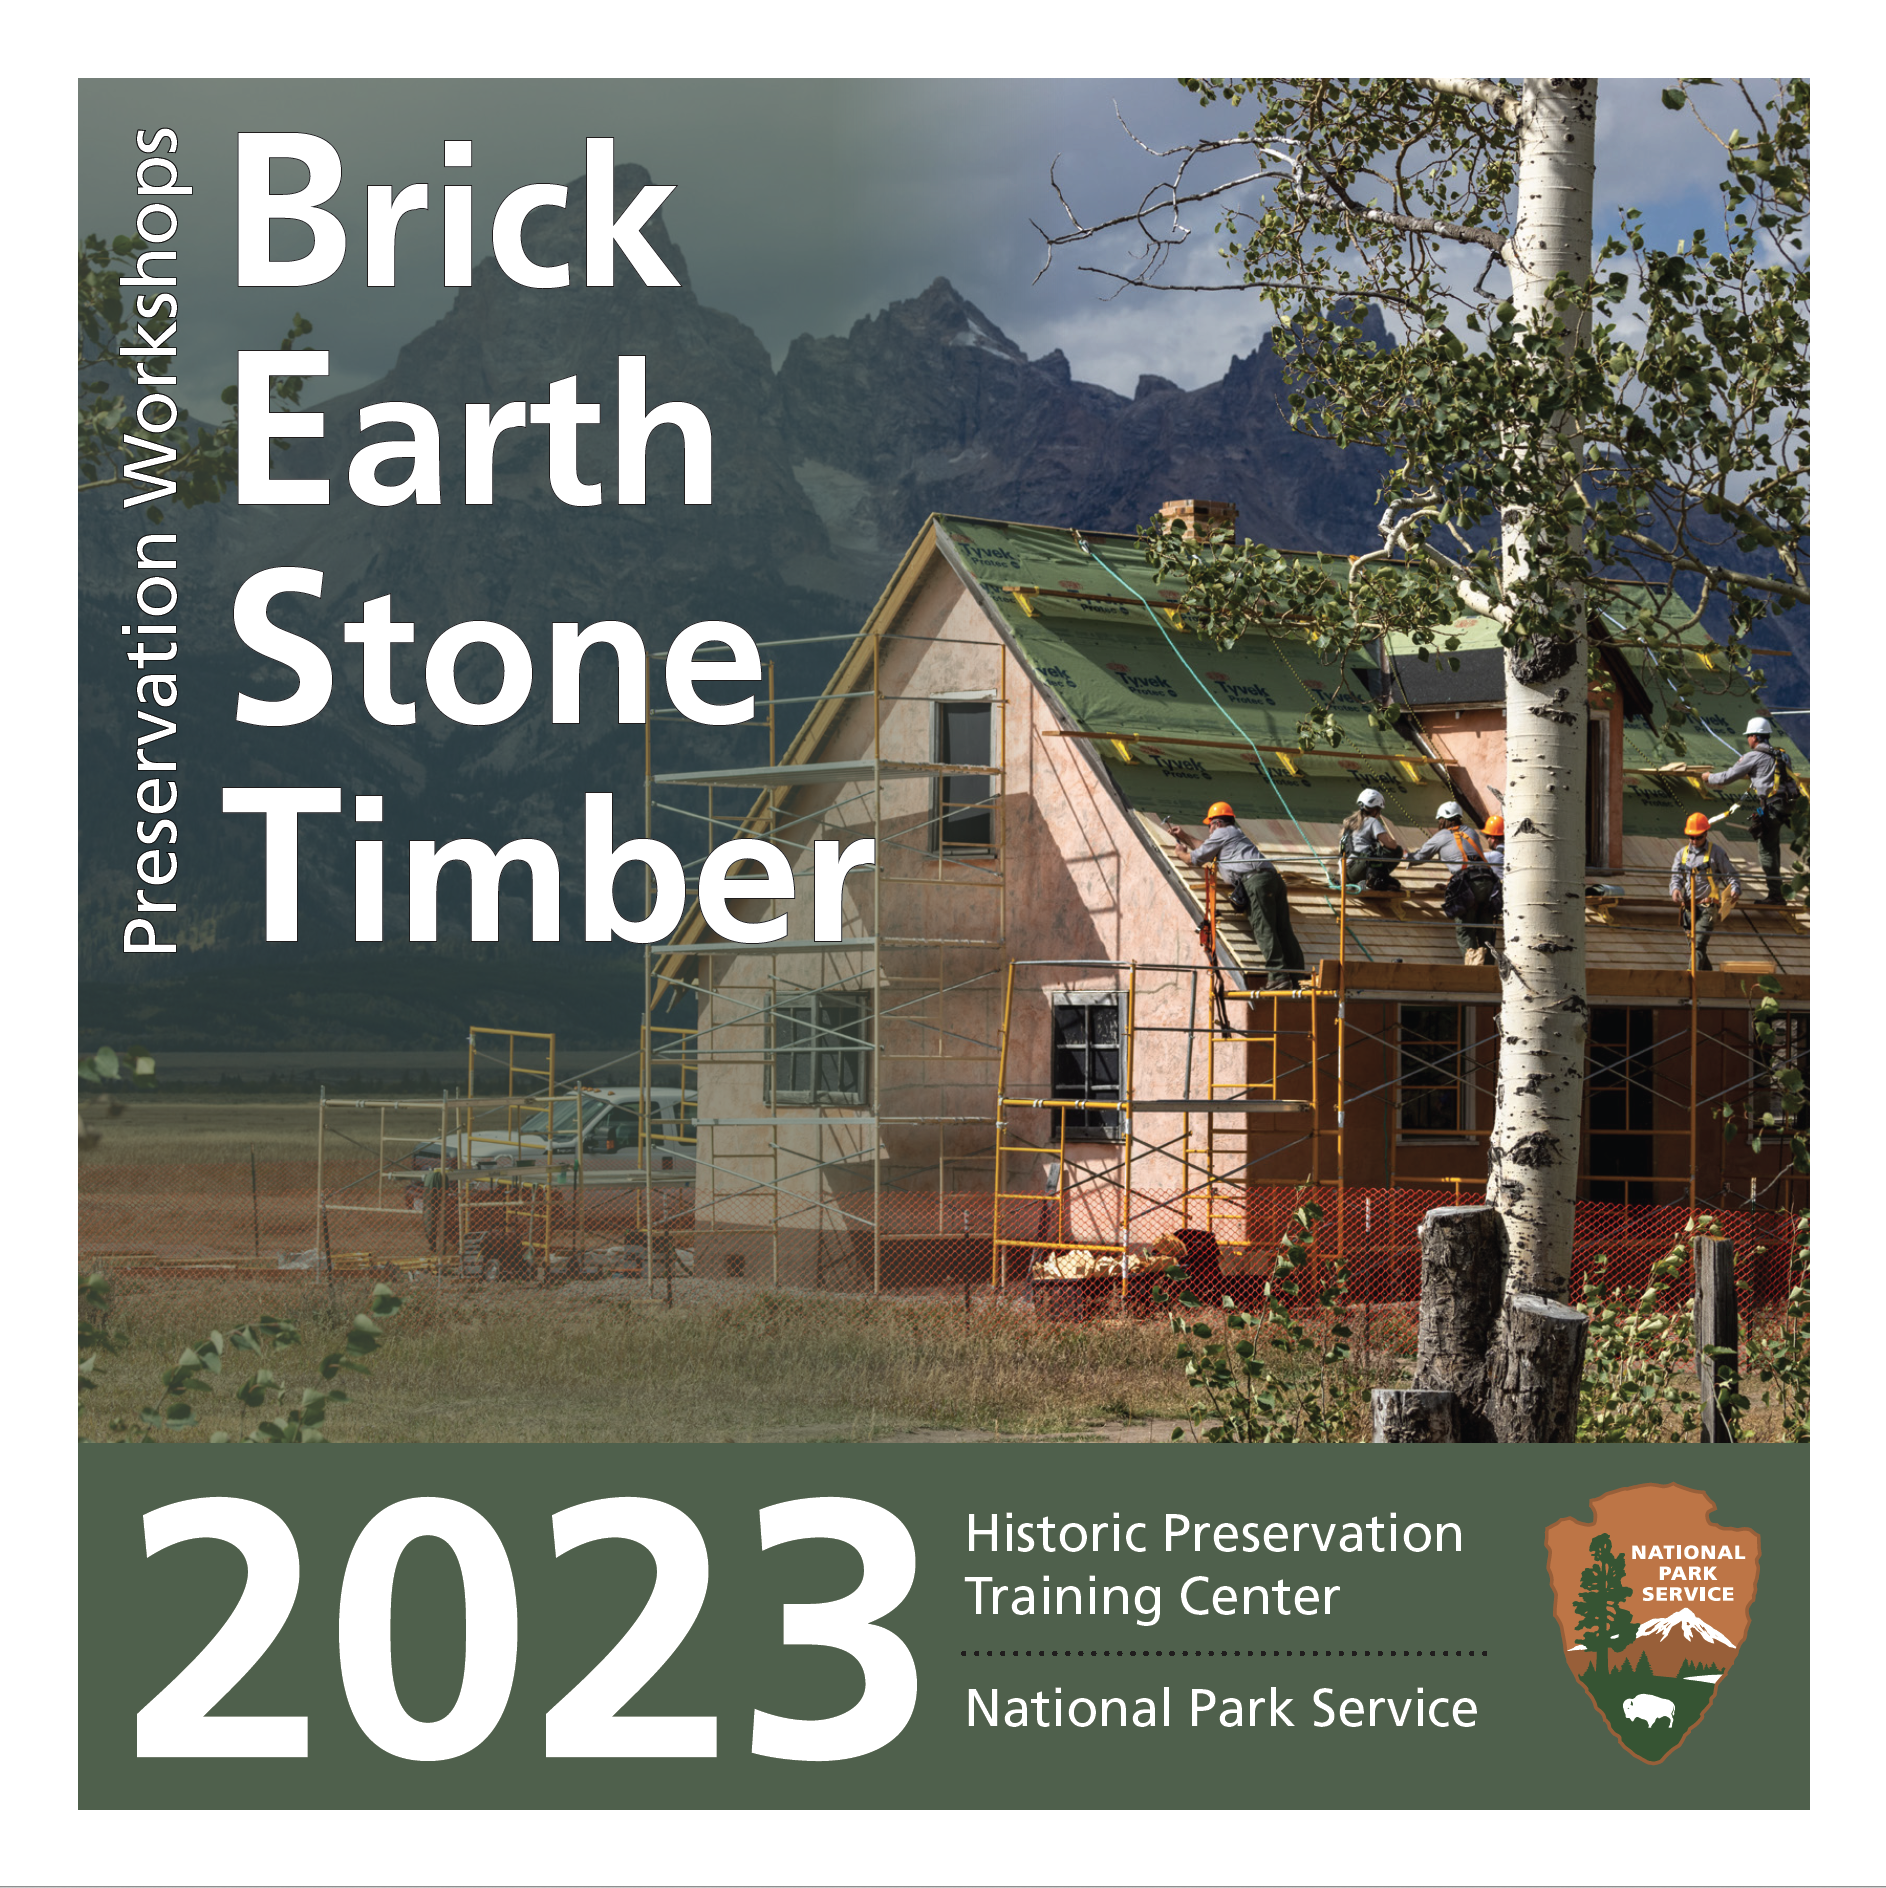 Catalog cover; reads BEST Preservation Workshop Series, 2023, Historic Preservation Training Center, National Park Service. Includes a photo of NPS employees putting shingles on the roof of a 1.5 story building and the NPS arrowhead.